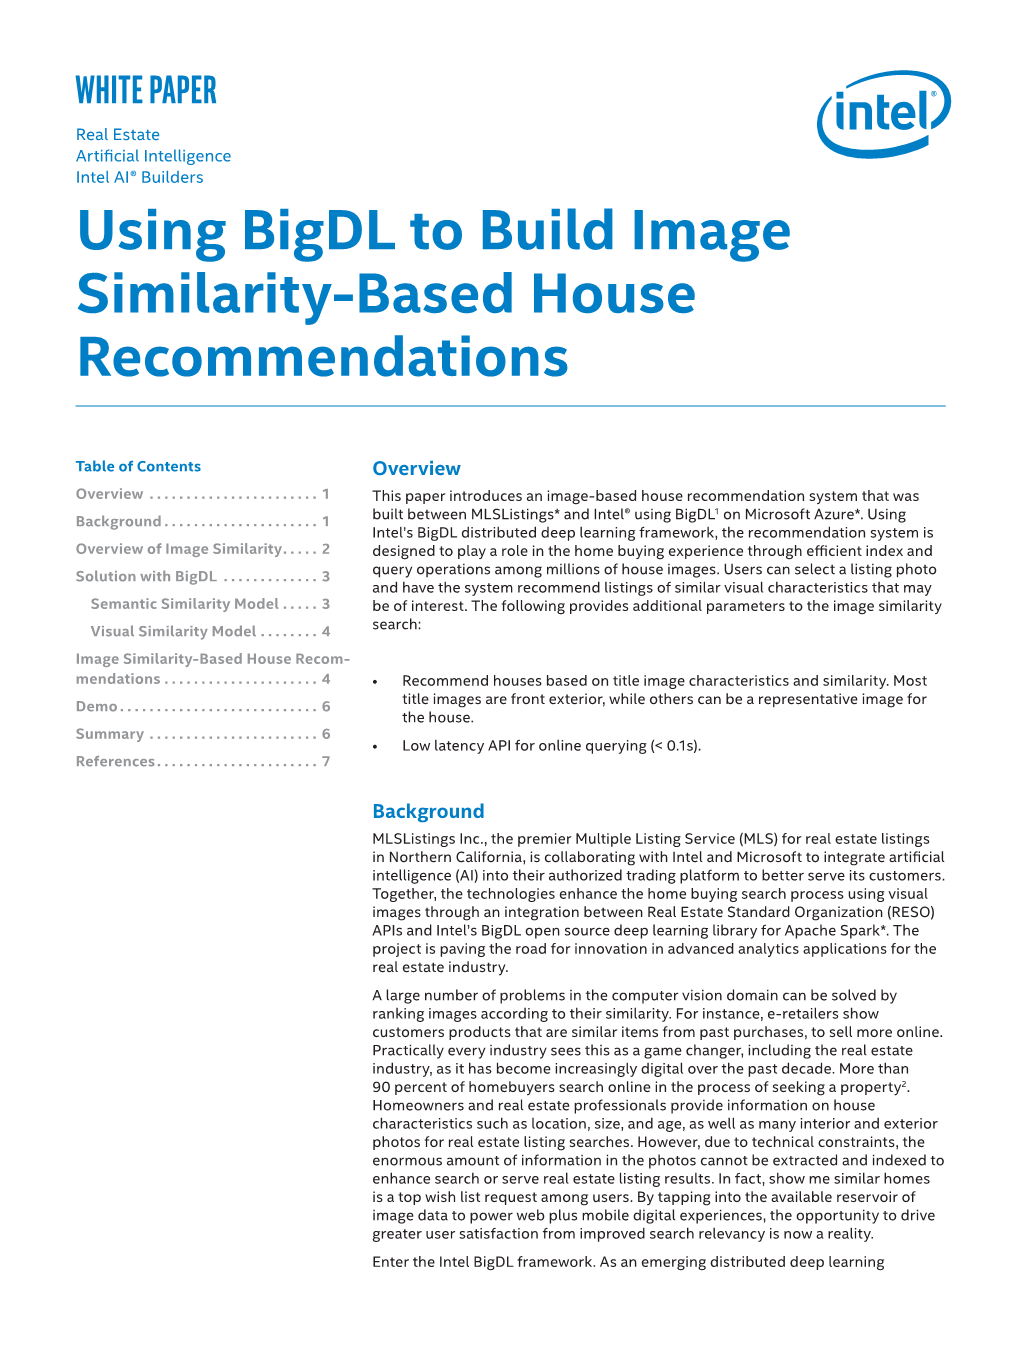 Using Bigdl to Build Image Similarity-Based House Recommendations